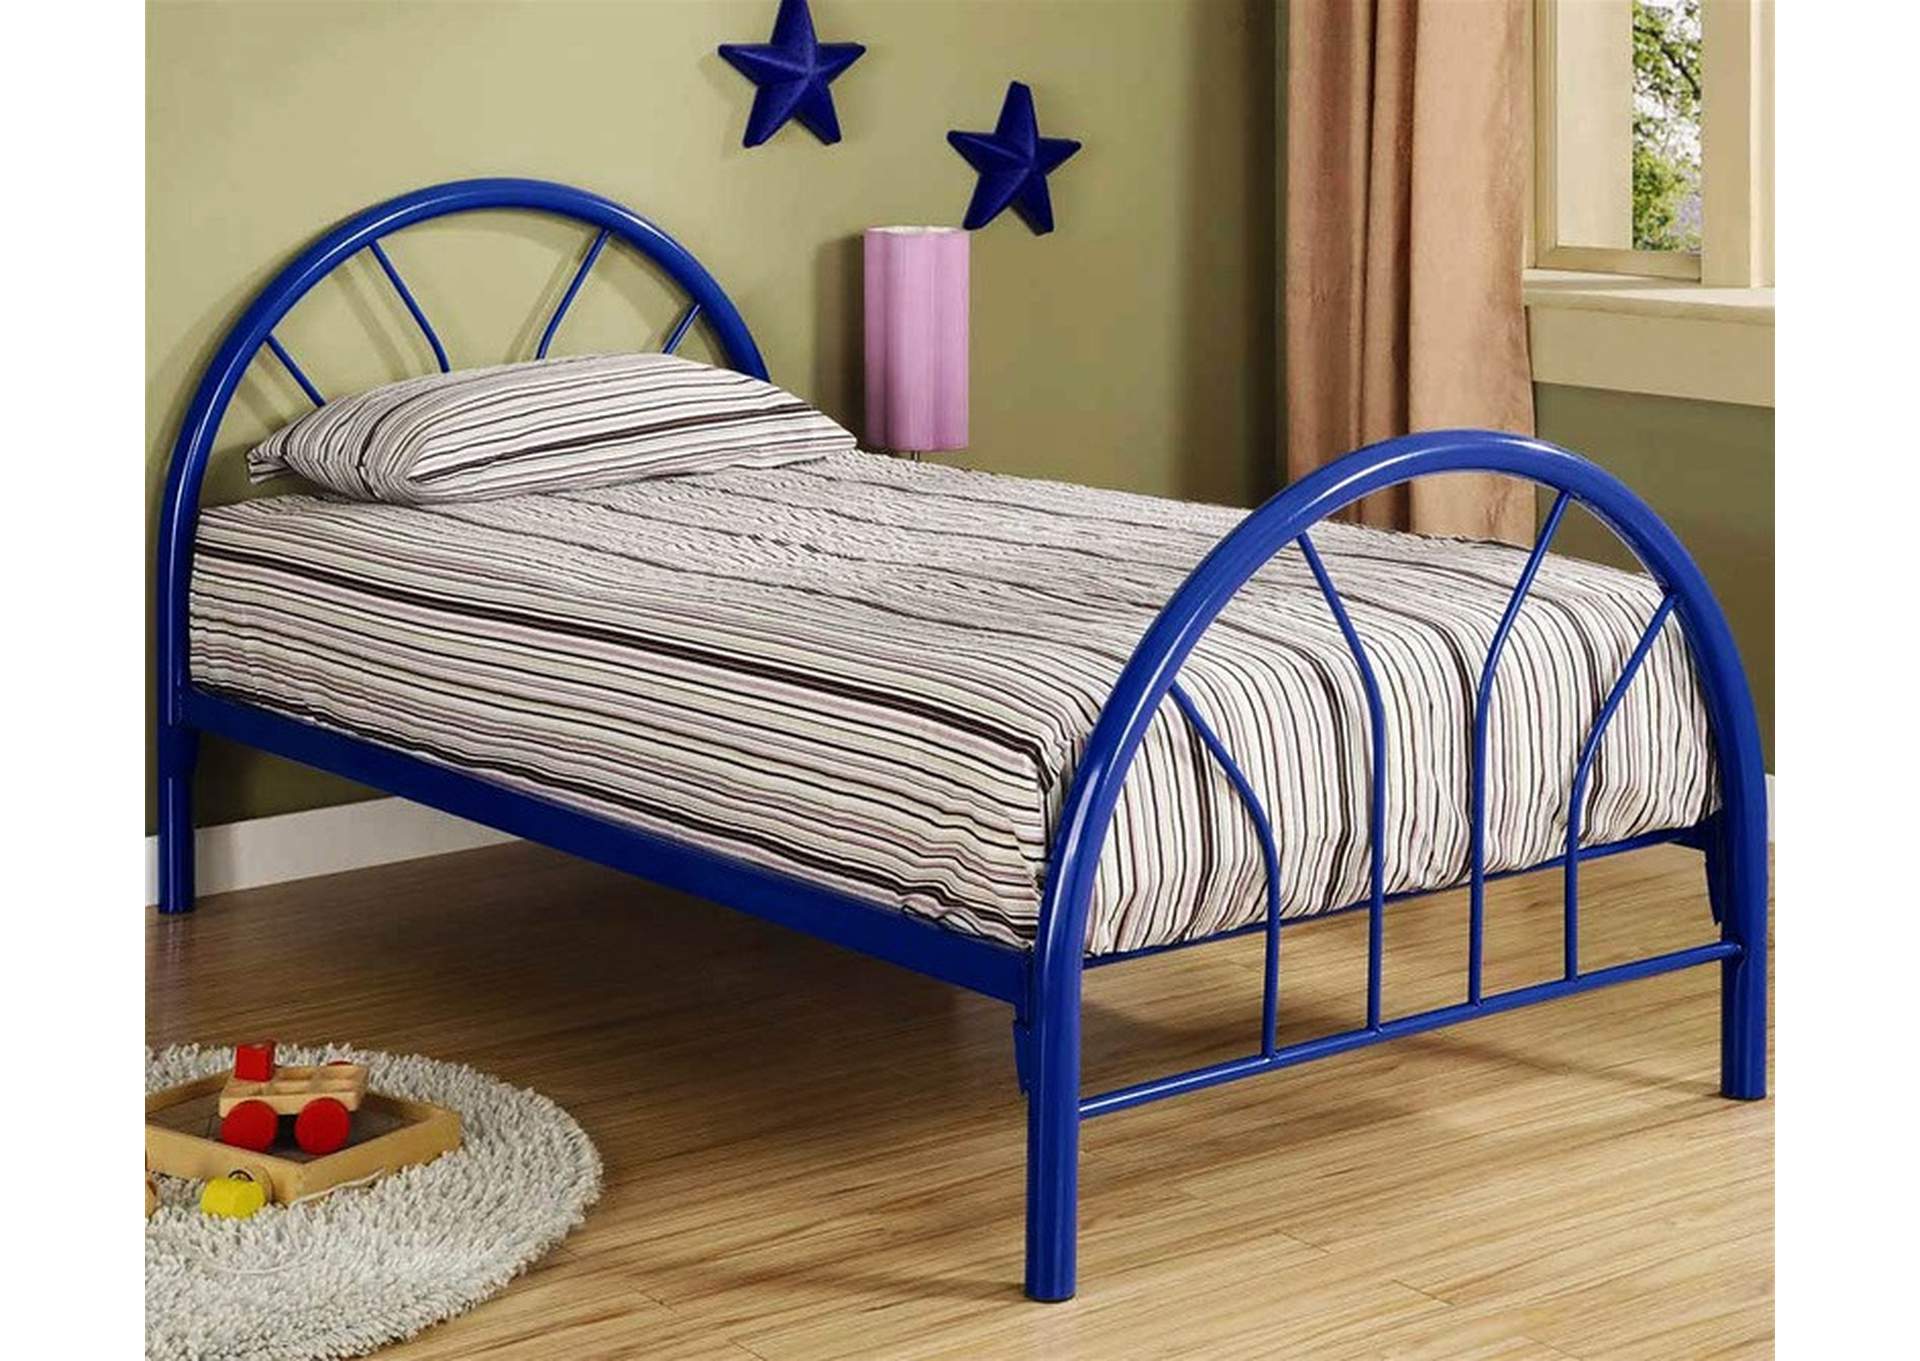 4461 Blue Twin Size Bed,Global Trading